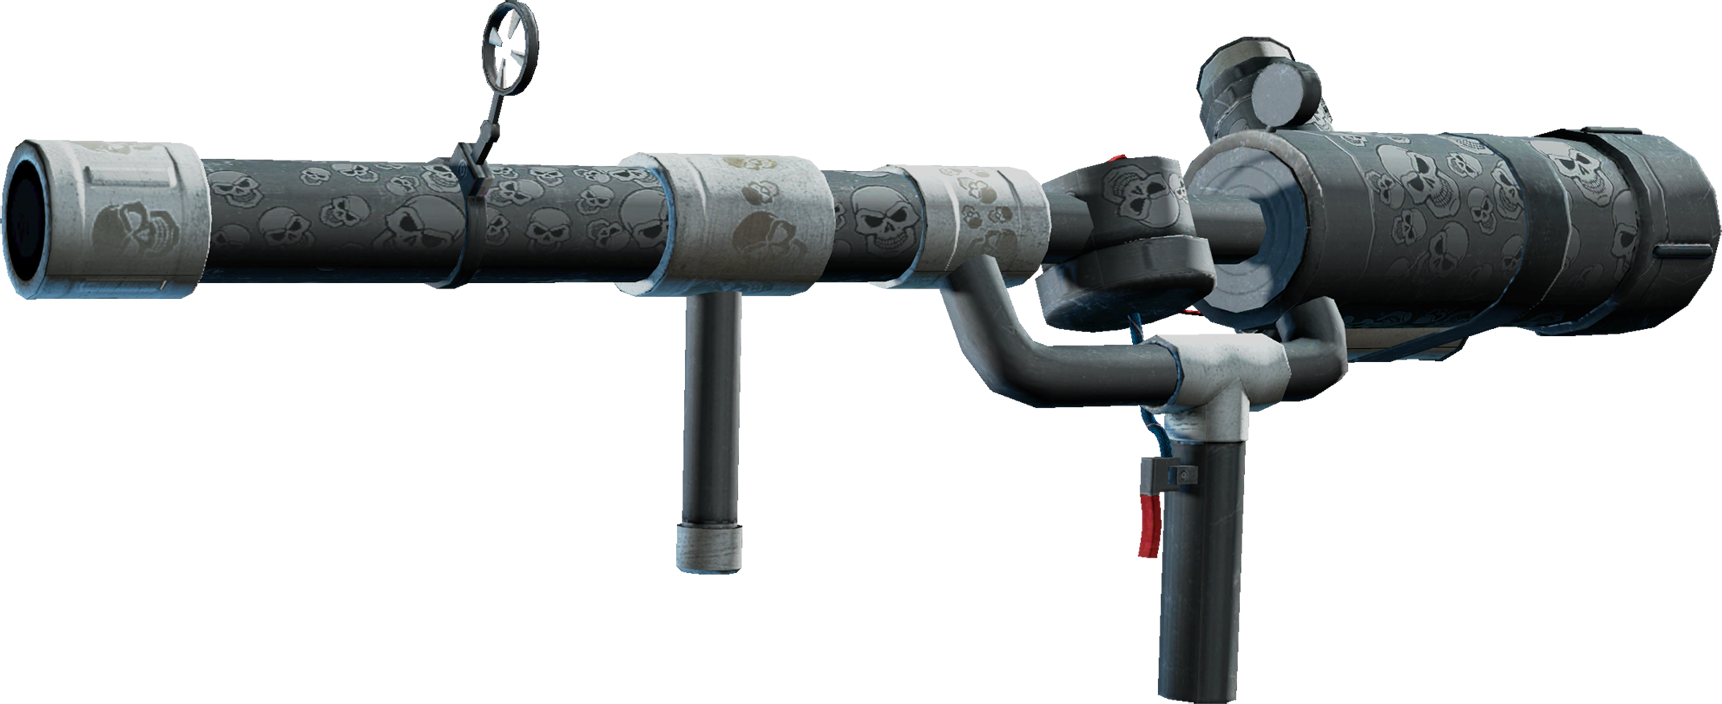 Image   Sriv Explosives   Rpg   Potato Gun   Ghostly Skull.png | Saints Row Wiki | Fandom Powered By Wikia - Rpg, Transparent background PNG HD thumbnail